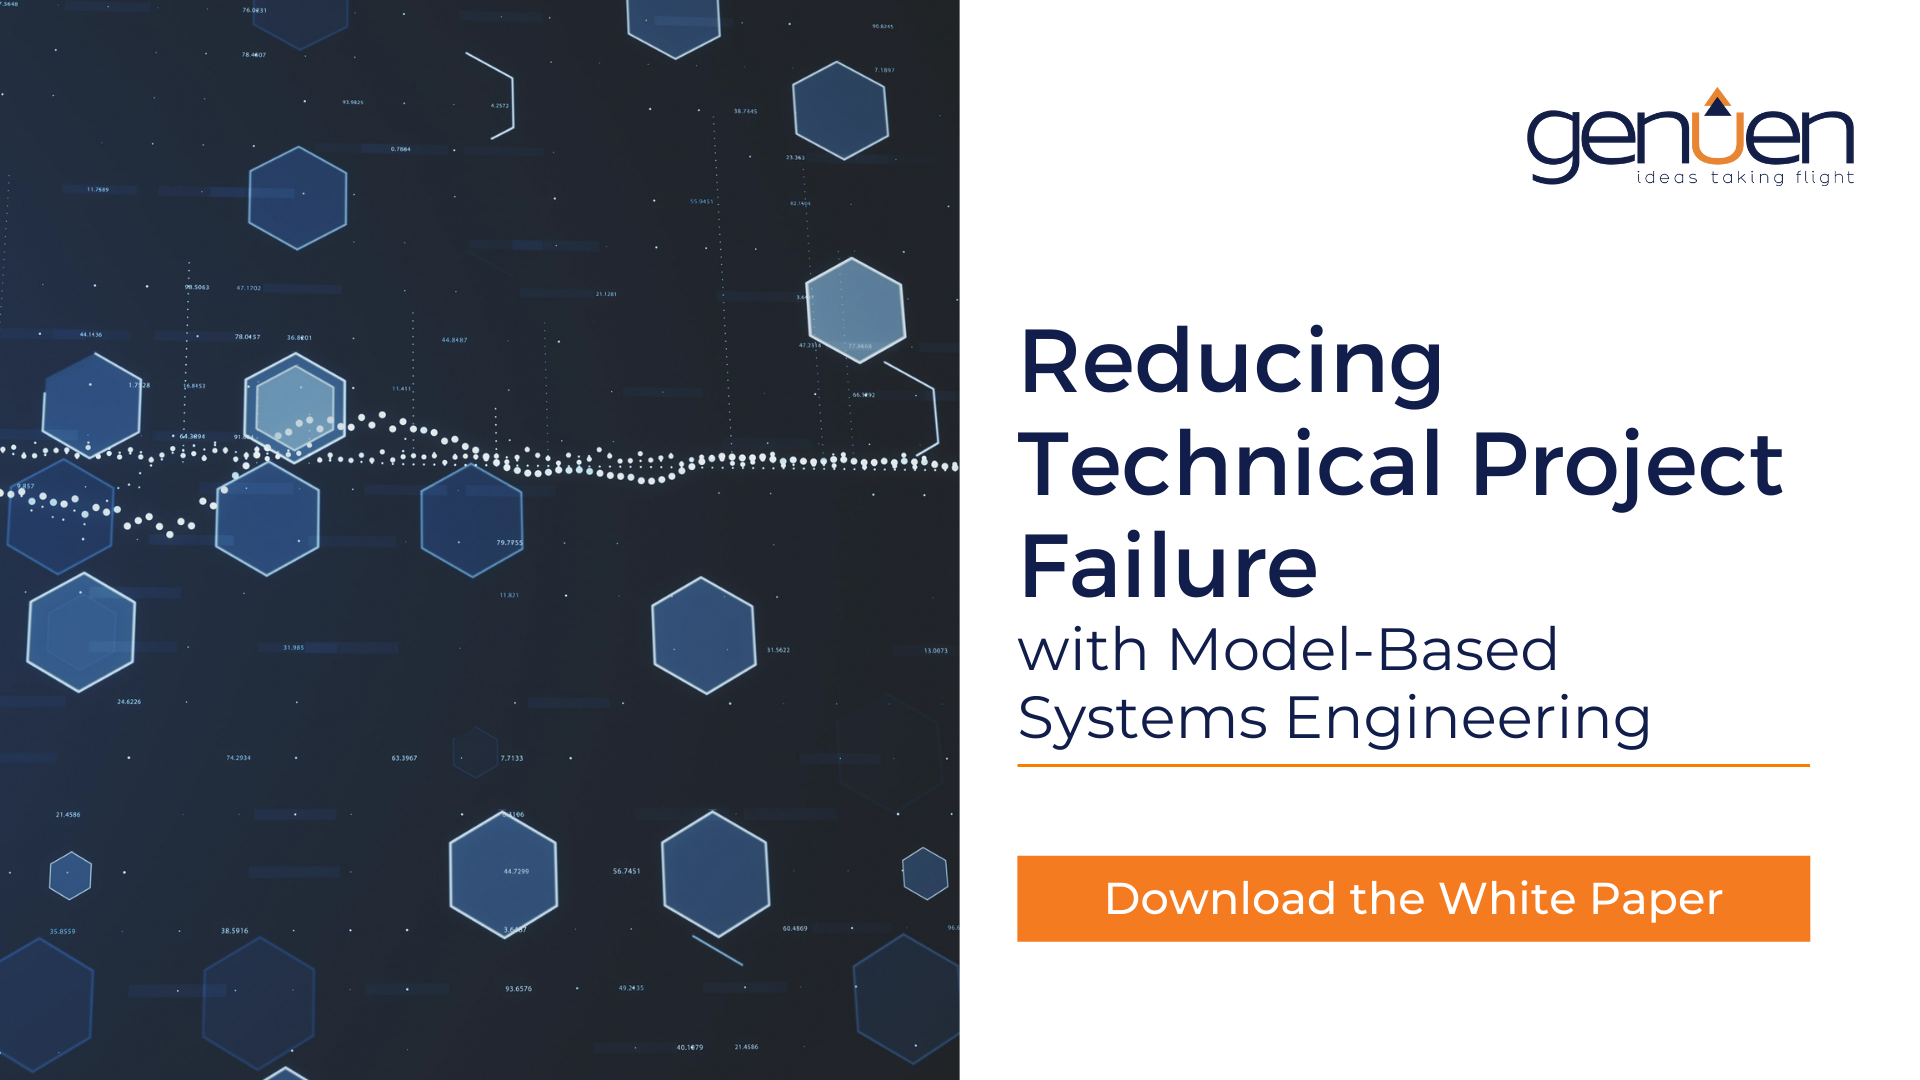 Reducing Technical Project Failure